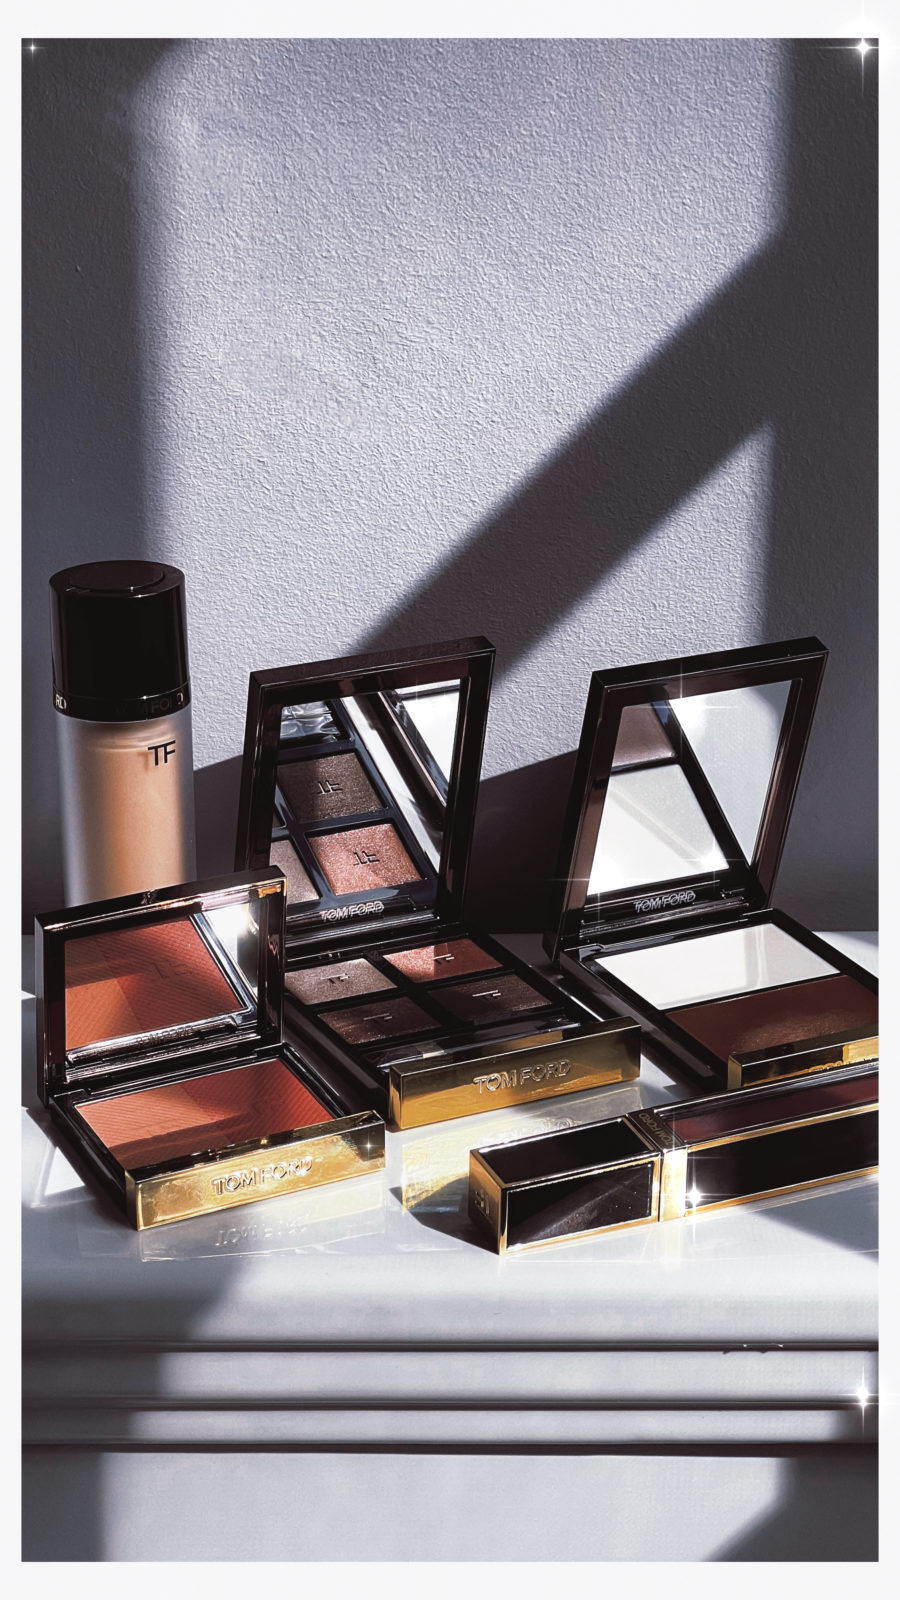 tom ford makeup collection from the sephora holiday savings event // Jessica Wang - Notjessfashion.com